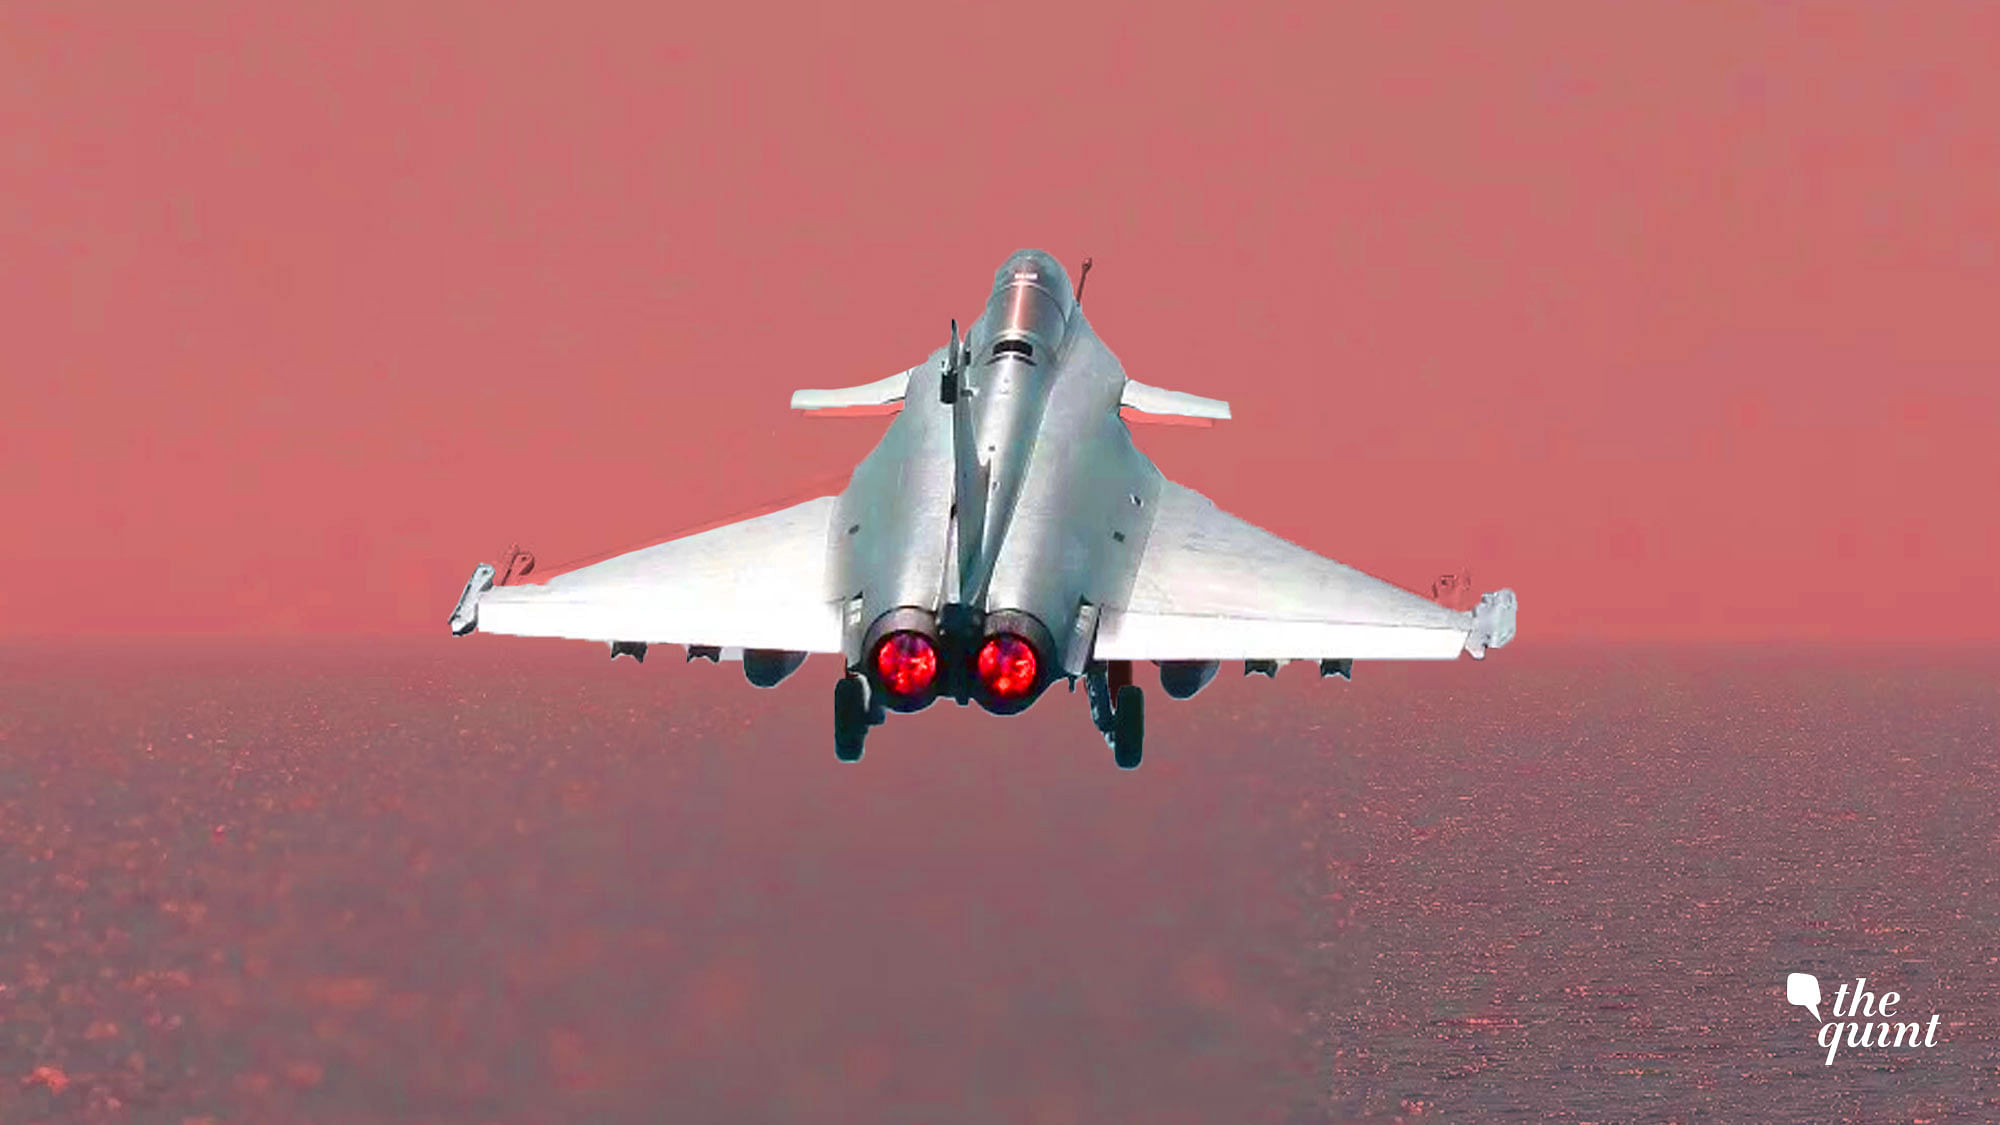 An image of a French Rafale fighter used for representational purposes.